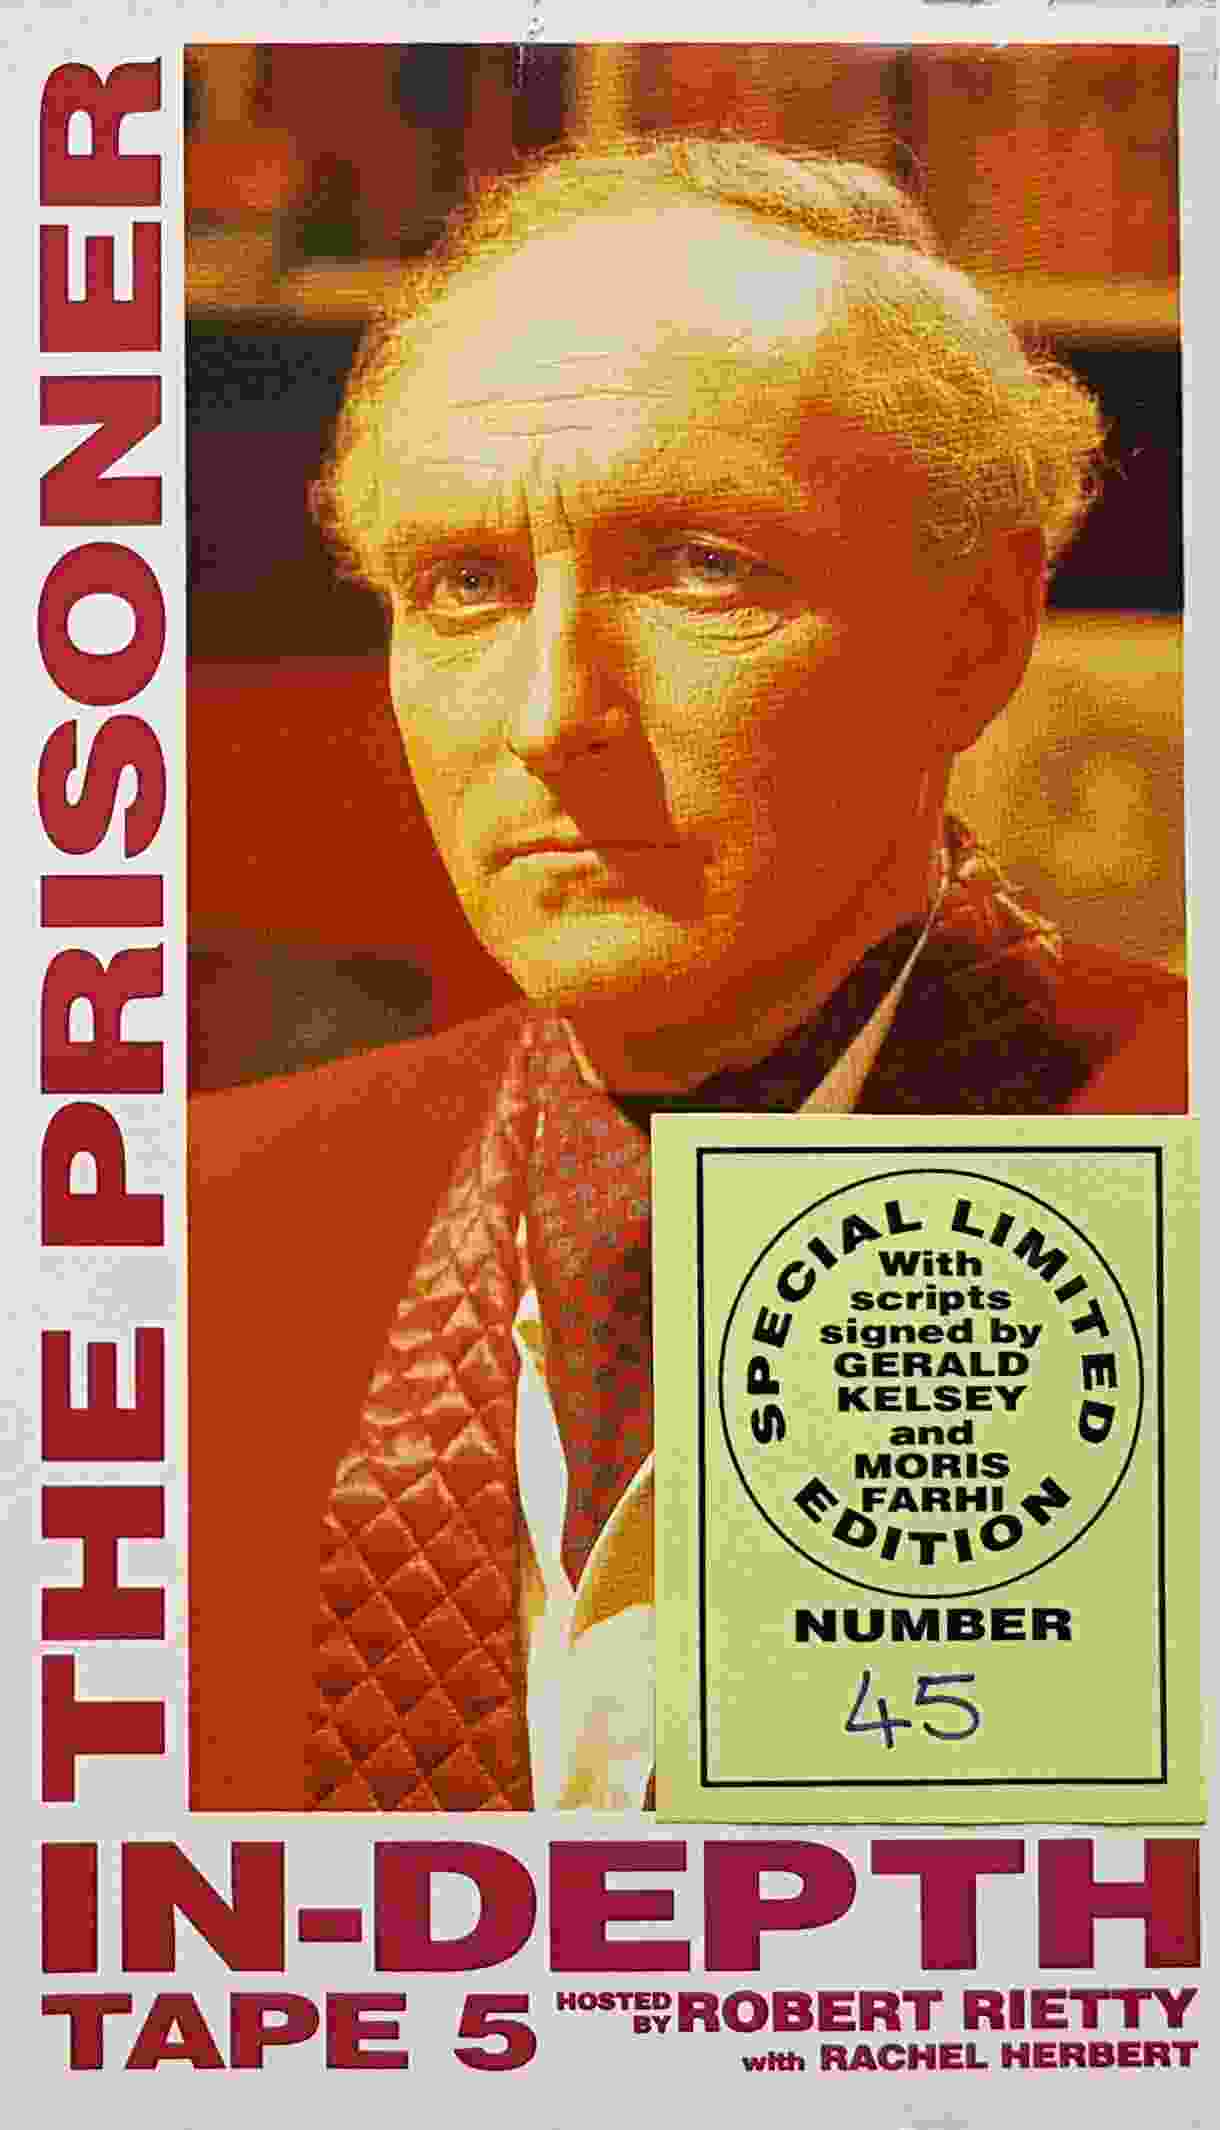 Picture of The prisoner indepth tape 5 by artist Unknown from ITV, Channel 4 and Channel 5 videos library